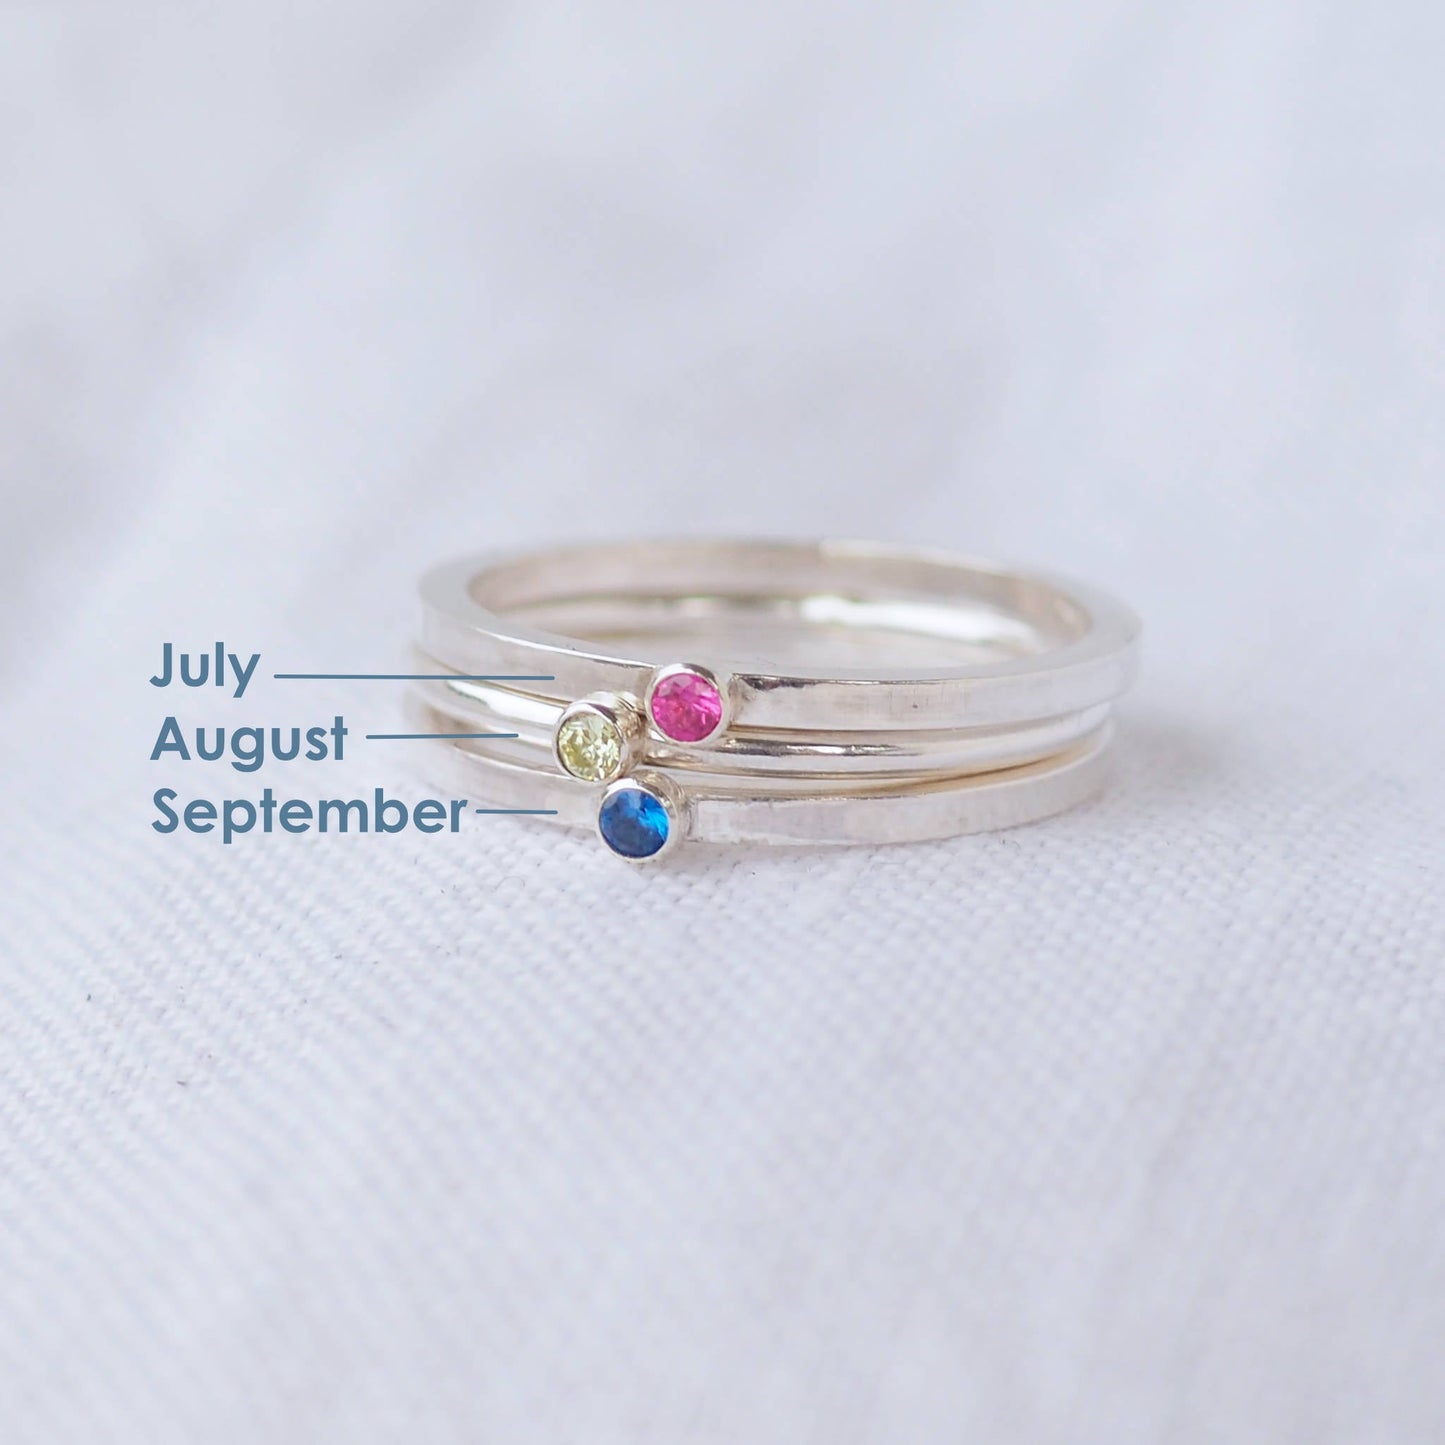 Three silver and gemstone rings with July, August and September birthstones. Silver rings with a 3mm size stone in simple style with a red, moss green and blue gemstone. Handmade in Scotland by Maram Jewellery